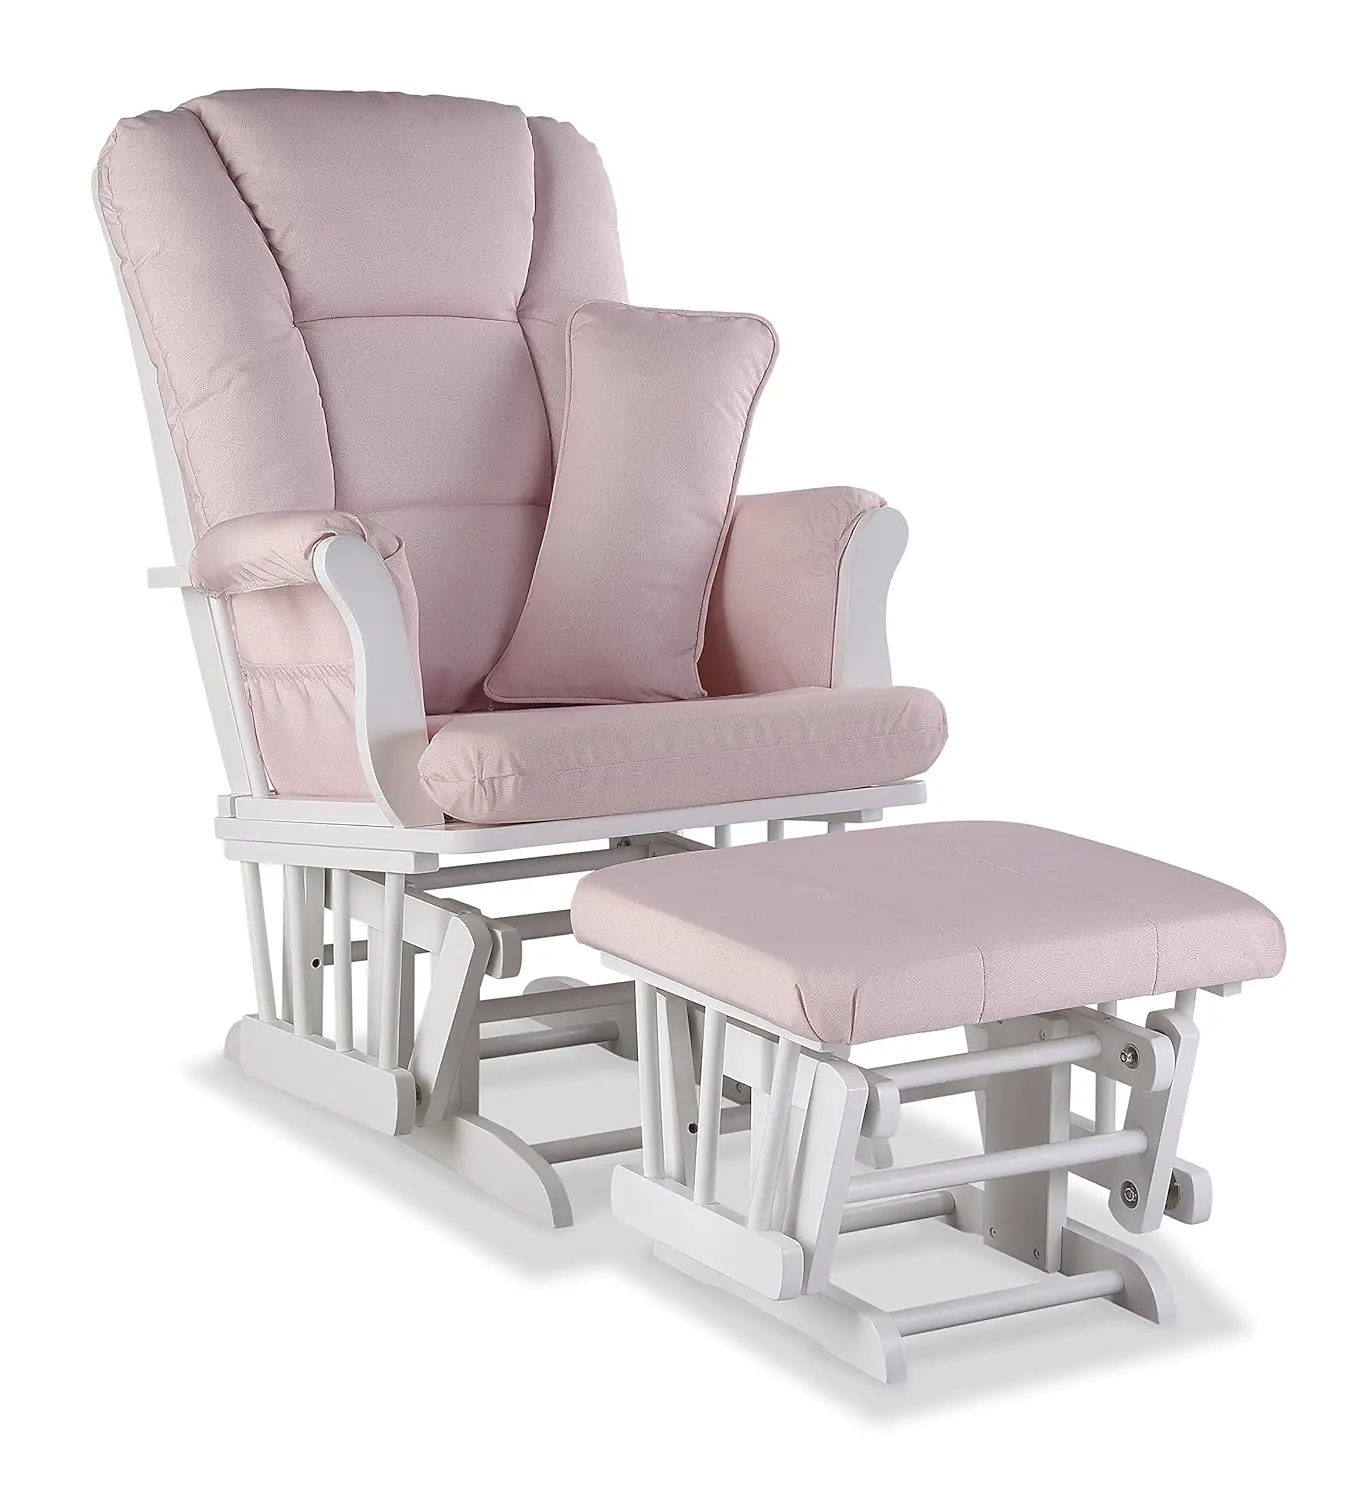 

Glider and Ottoman with Free Lumbar Pillow (White/Pink Blush Swirl) - Cleanable Upholstered Comfort Rocking Nursery Chair